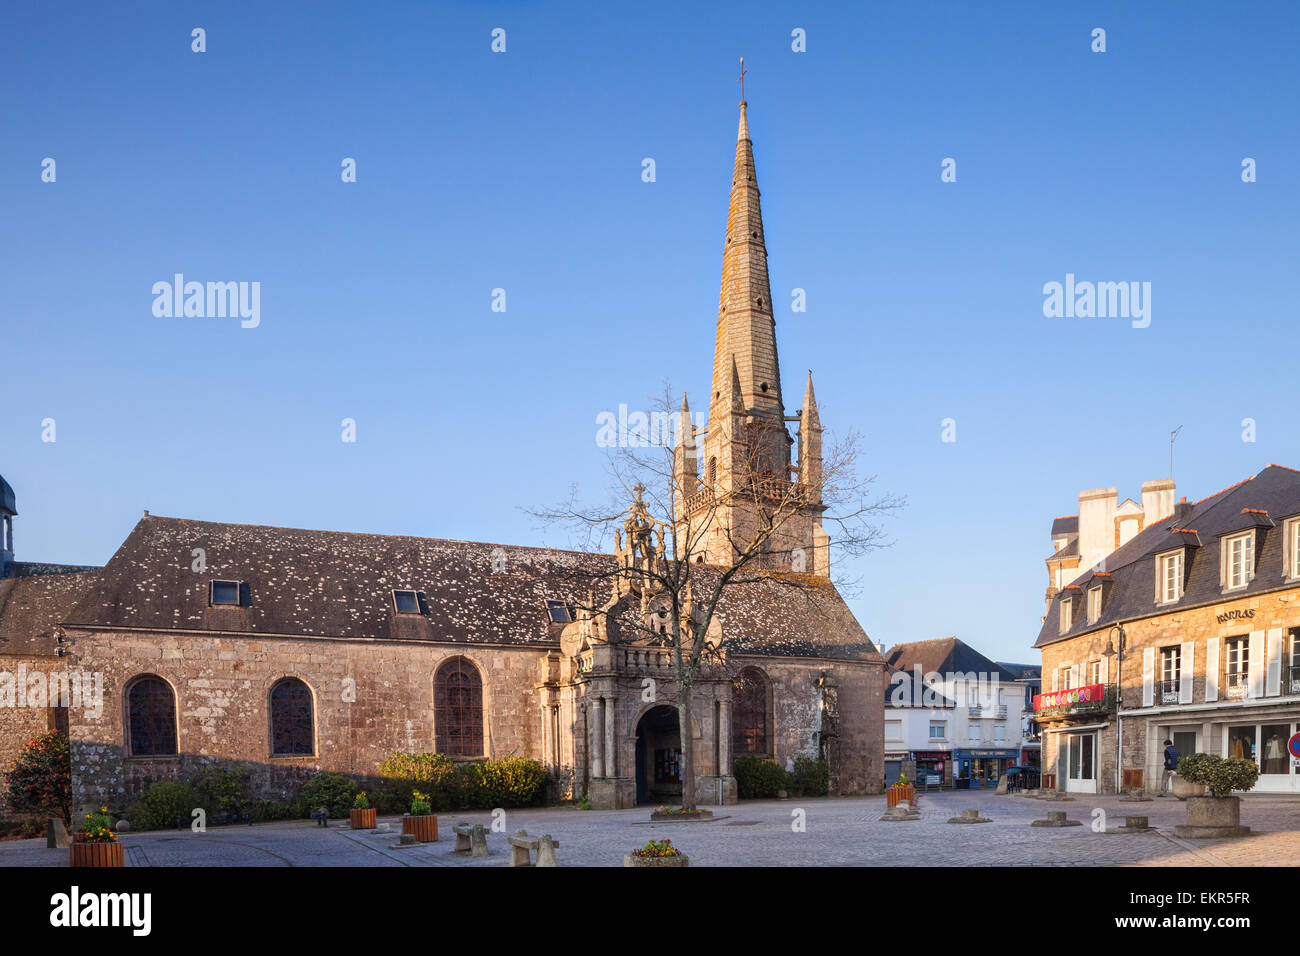 Saint-Comely Church, Carnac, Brittany, France. Stock Photo